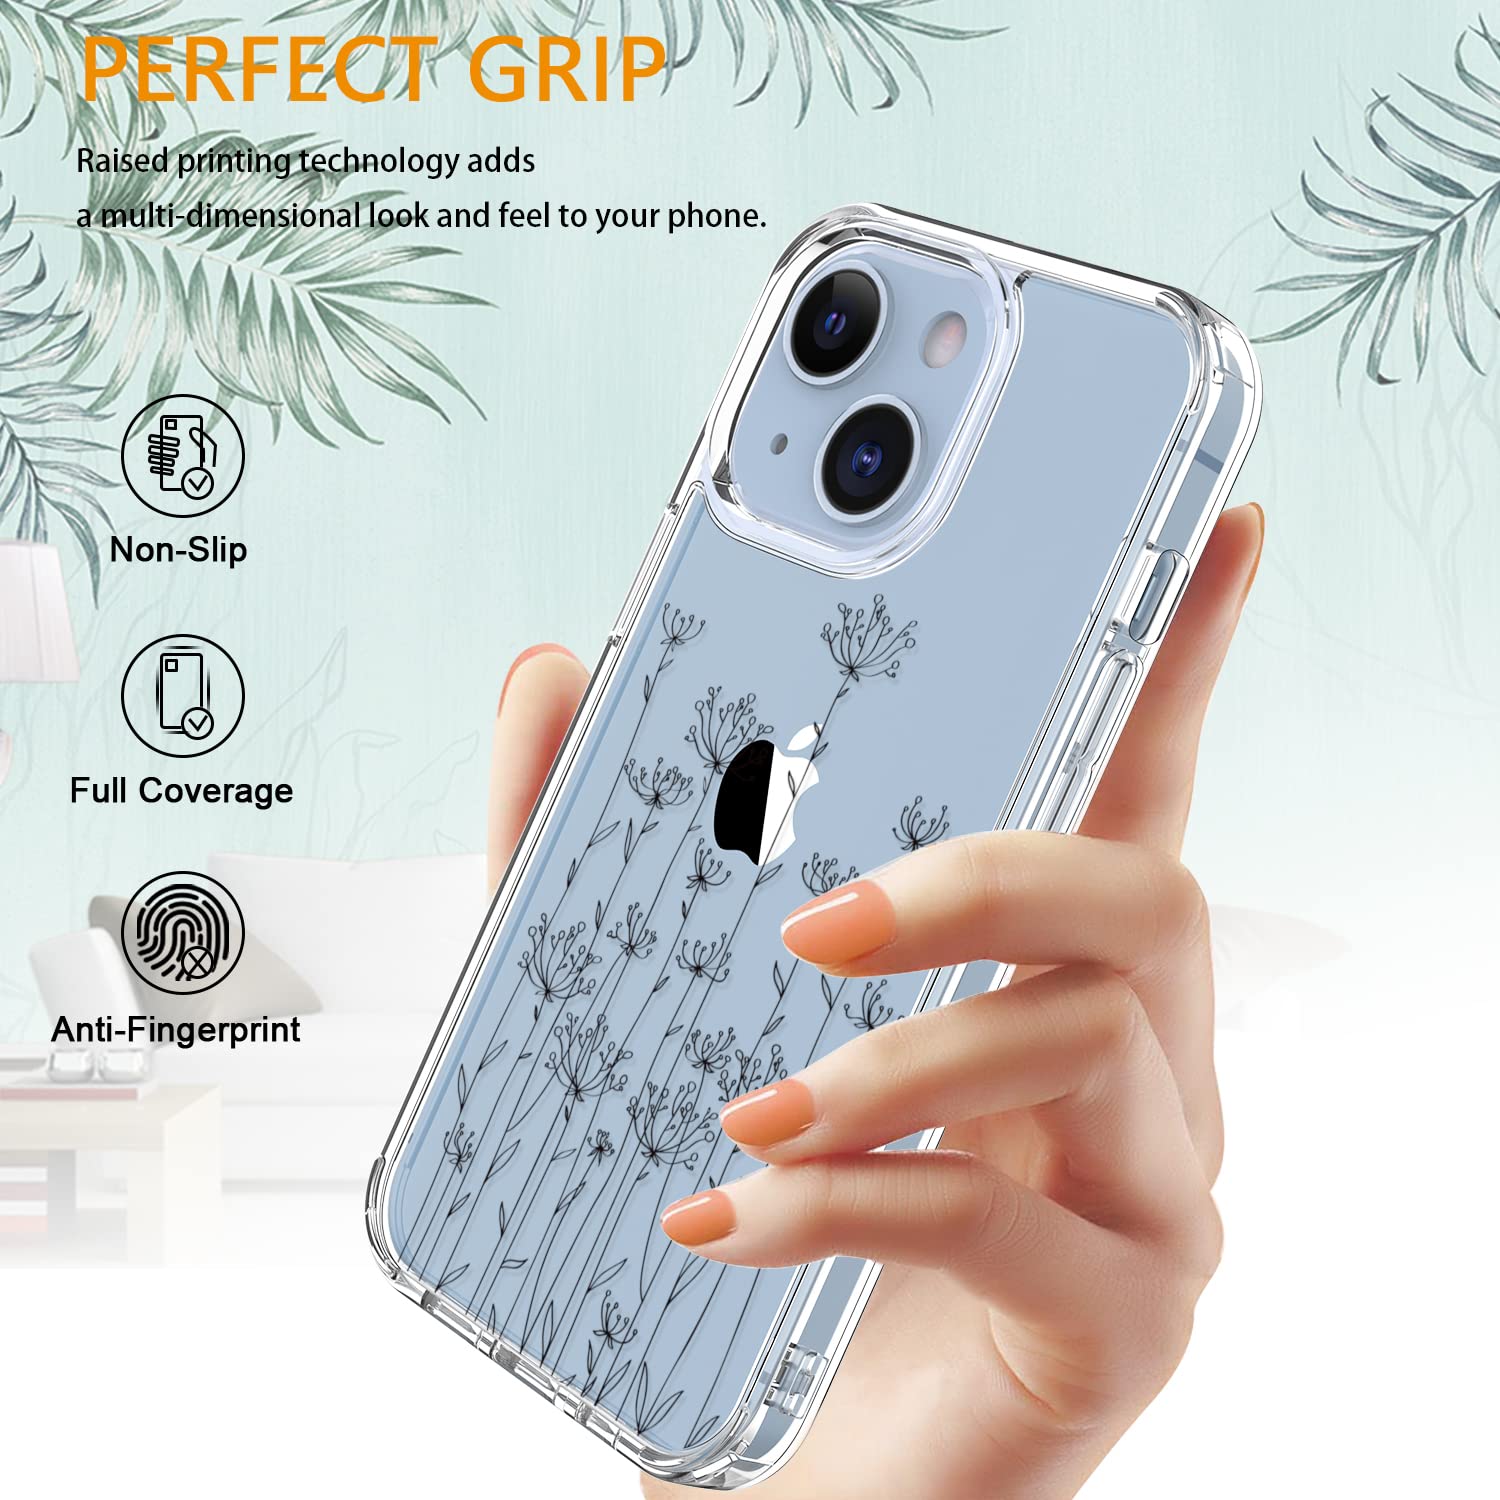 Zell Electronics Zell With Screen Protector,Clear Cover With Fashion Cute Designs For Women Girls,Slim Fit Durable Protective Phone Case For A…